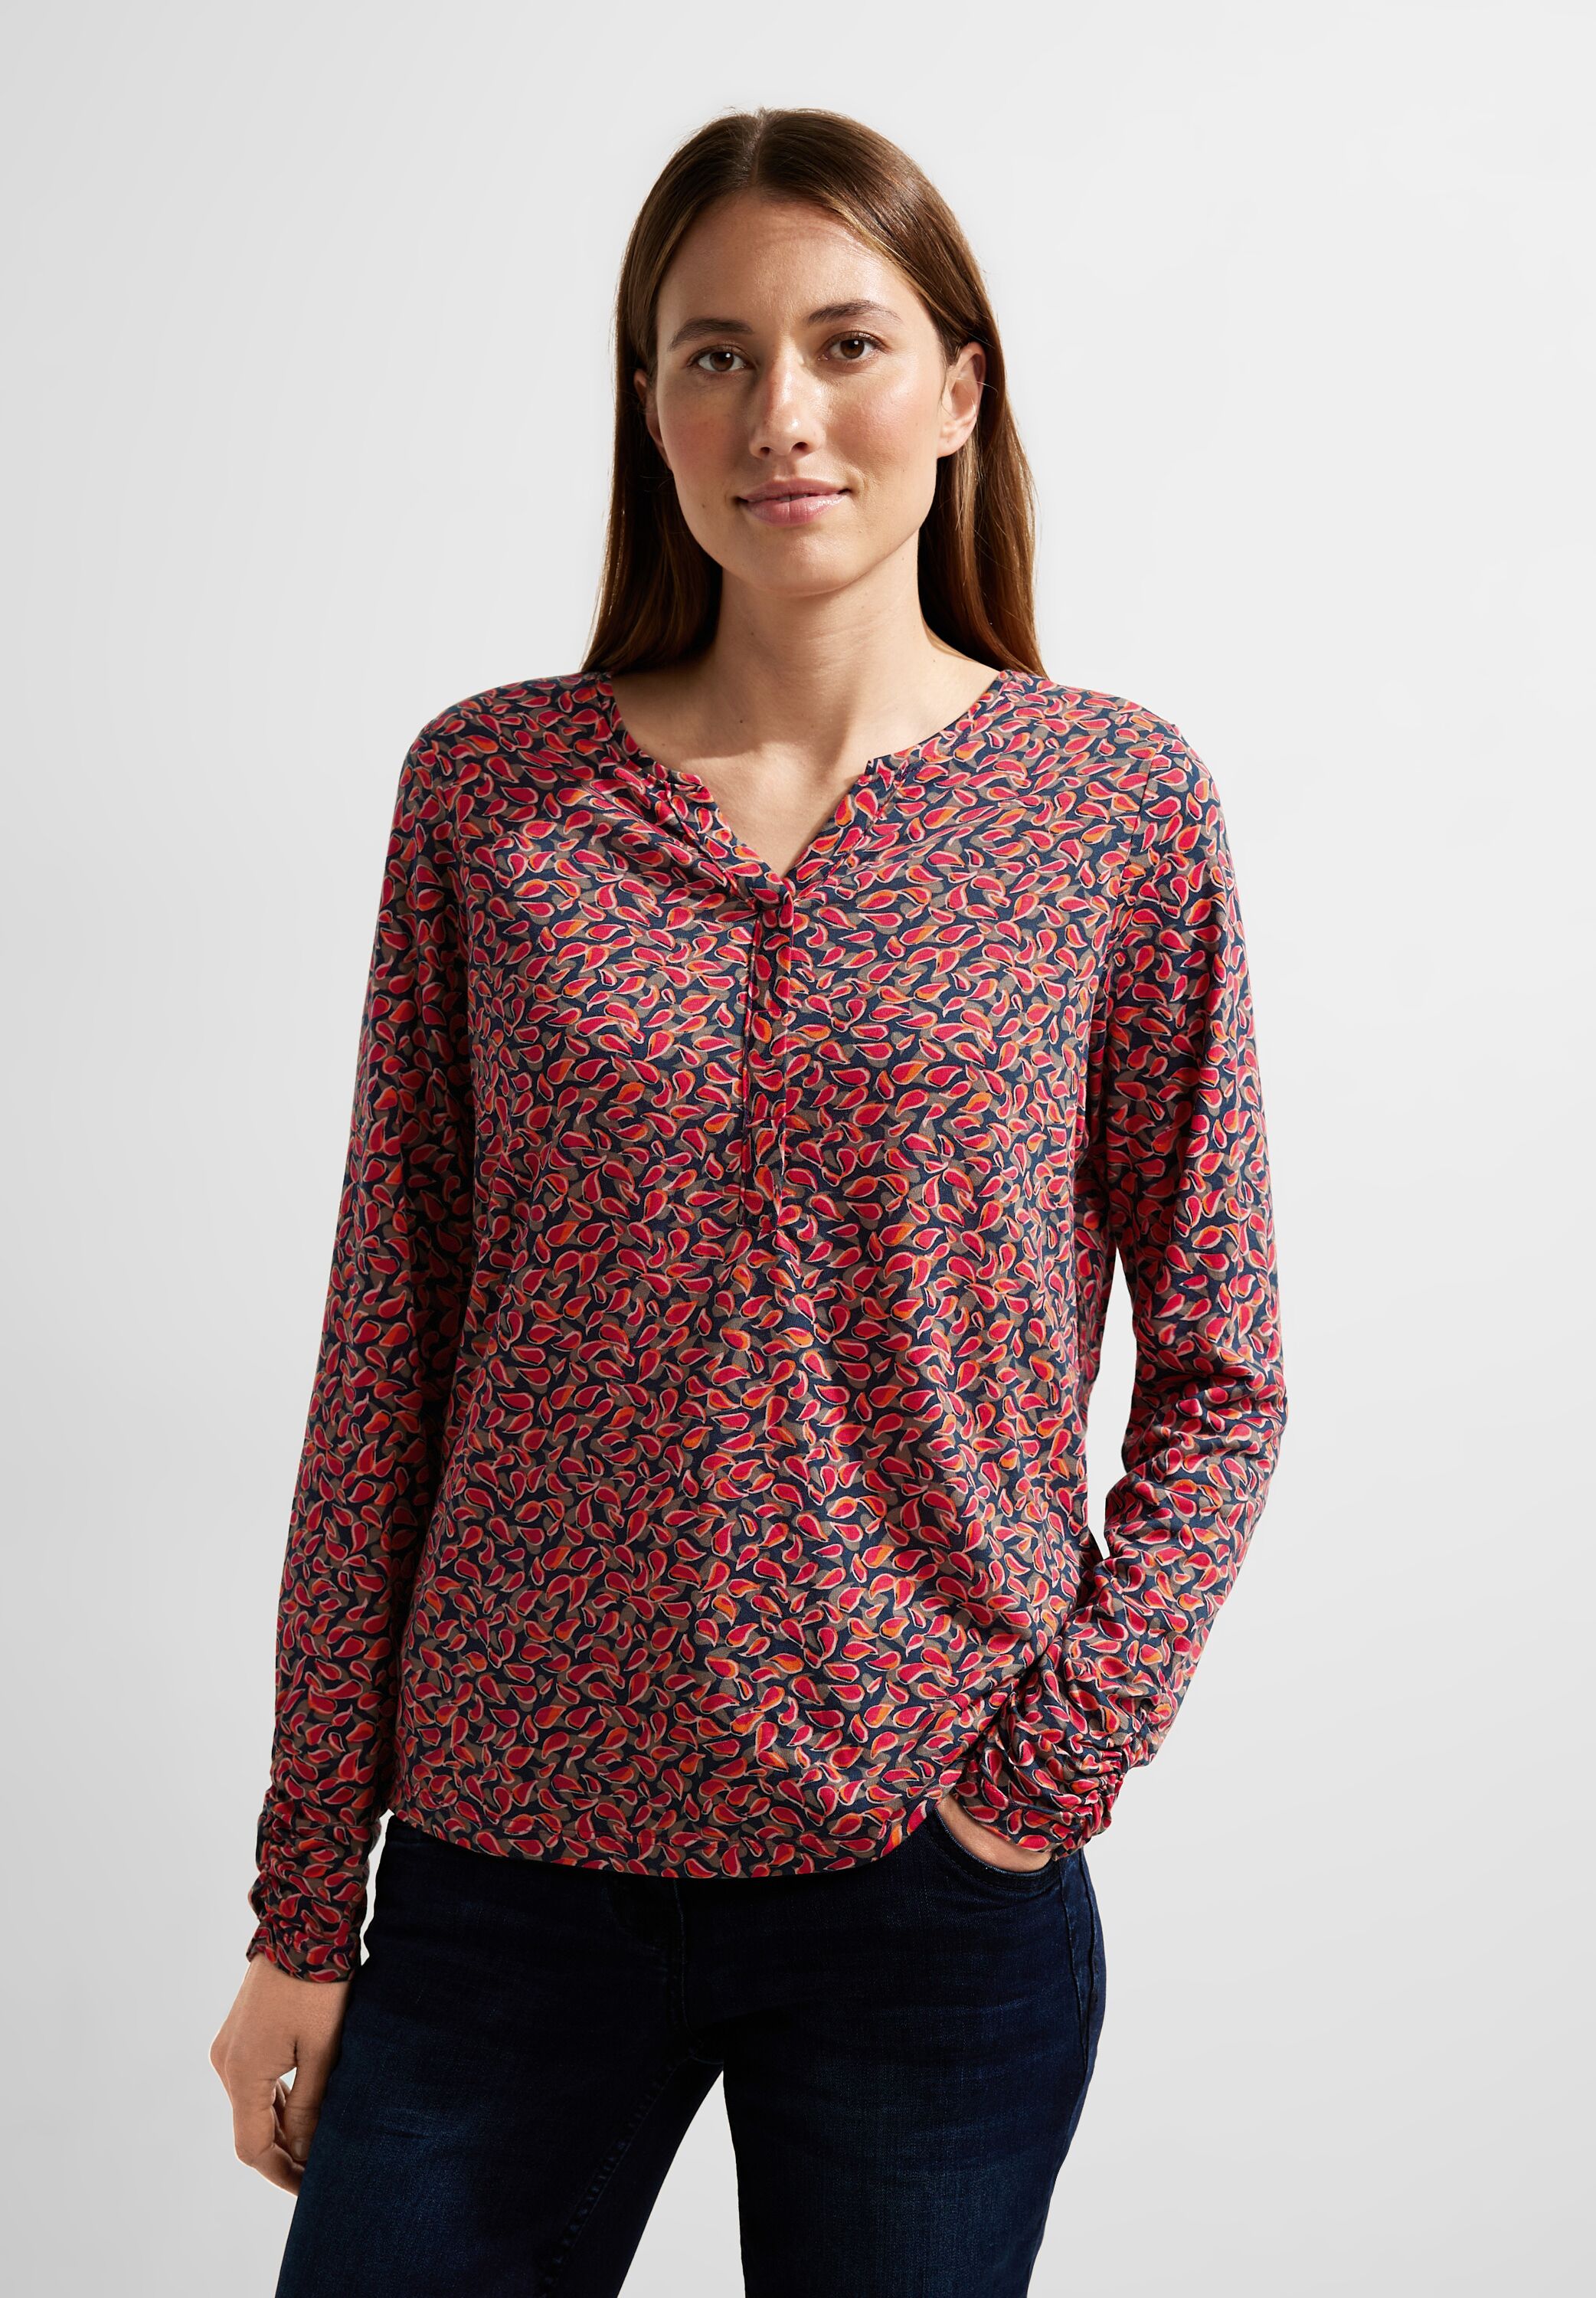 reduziert CONCEPT Coral SALE - Mode in Langarmshirt B320542-35068 Cosy CECIL im